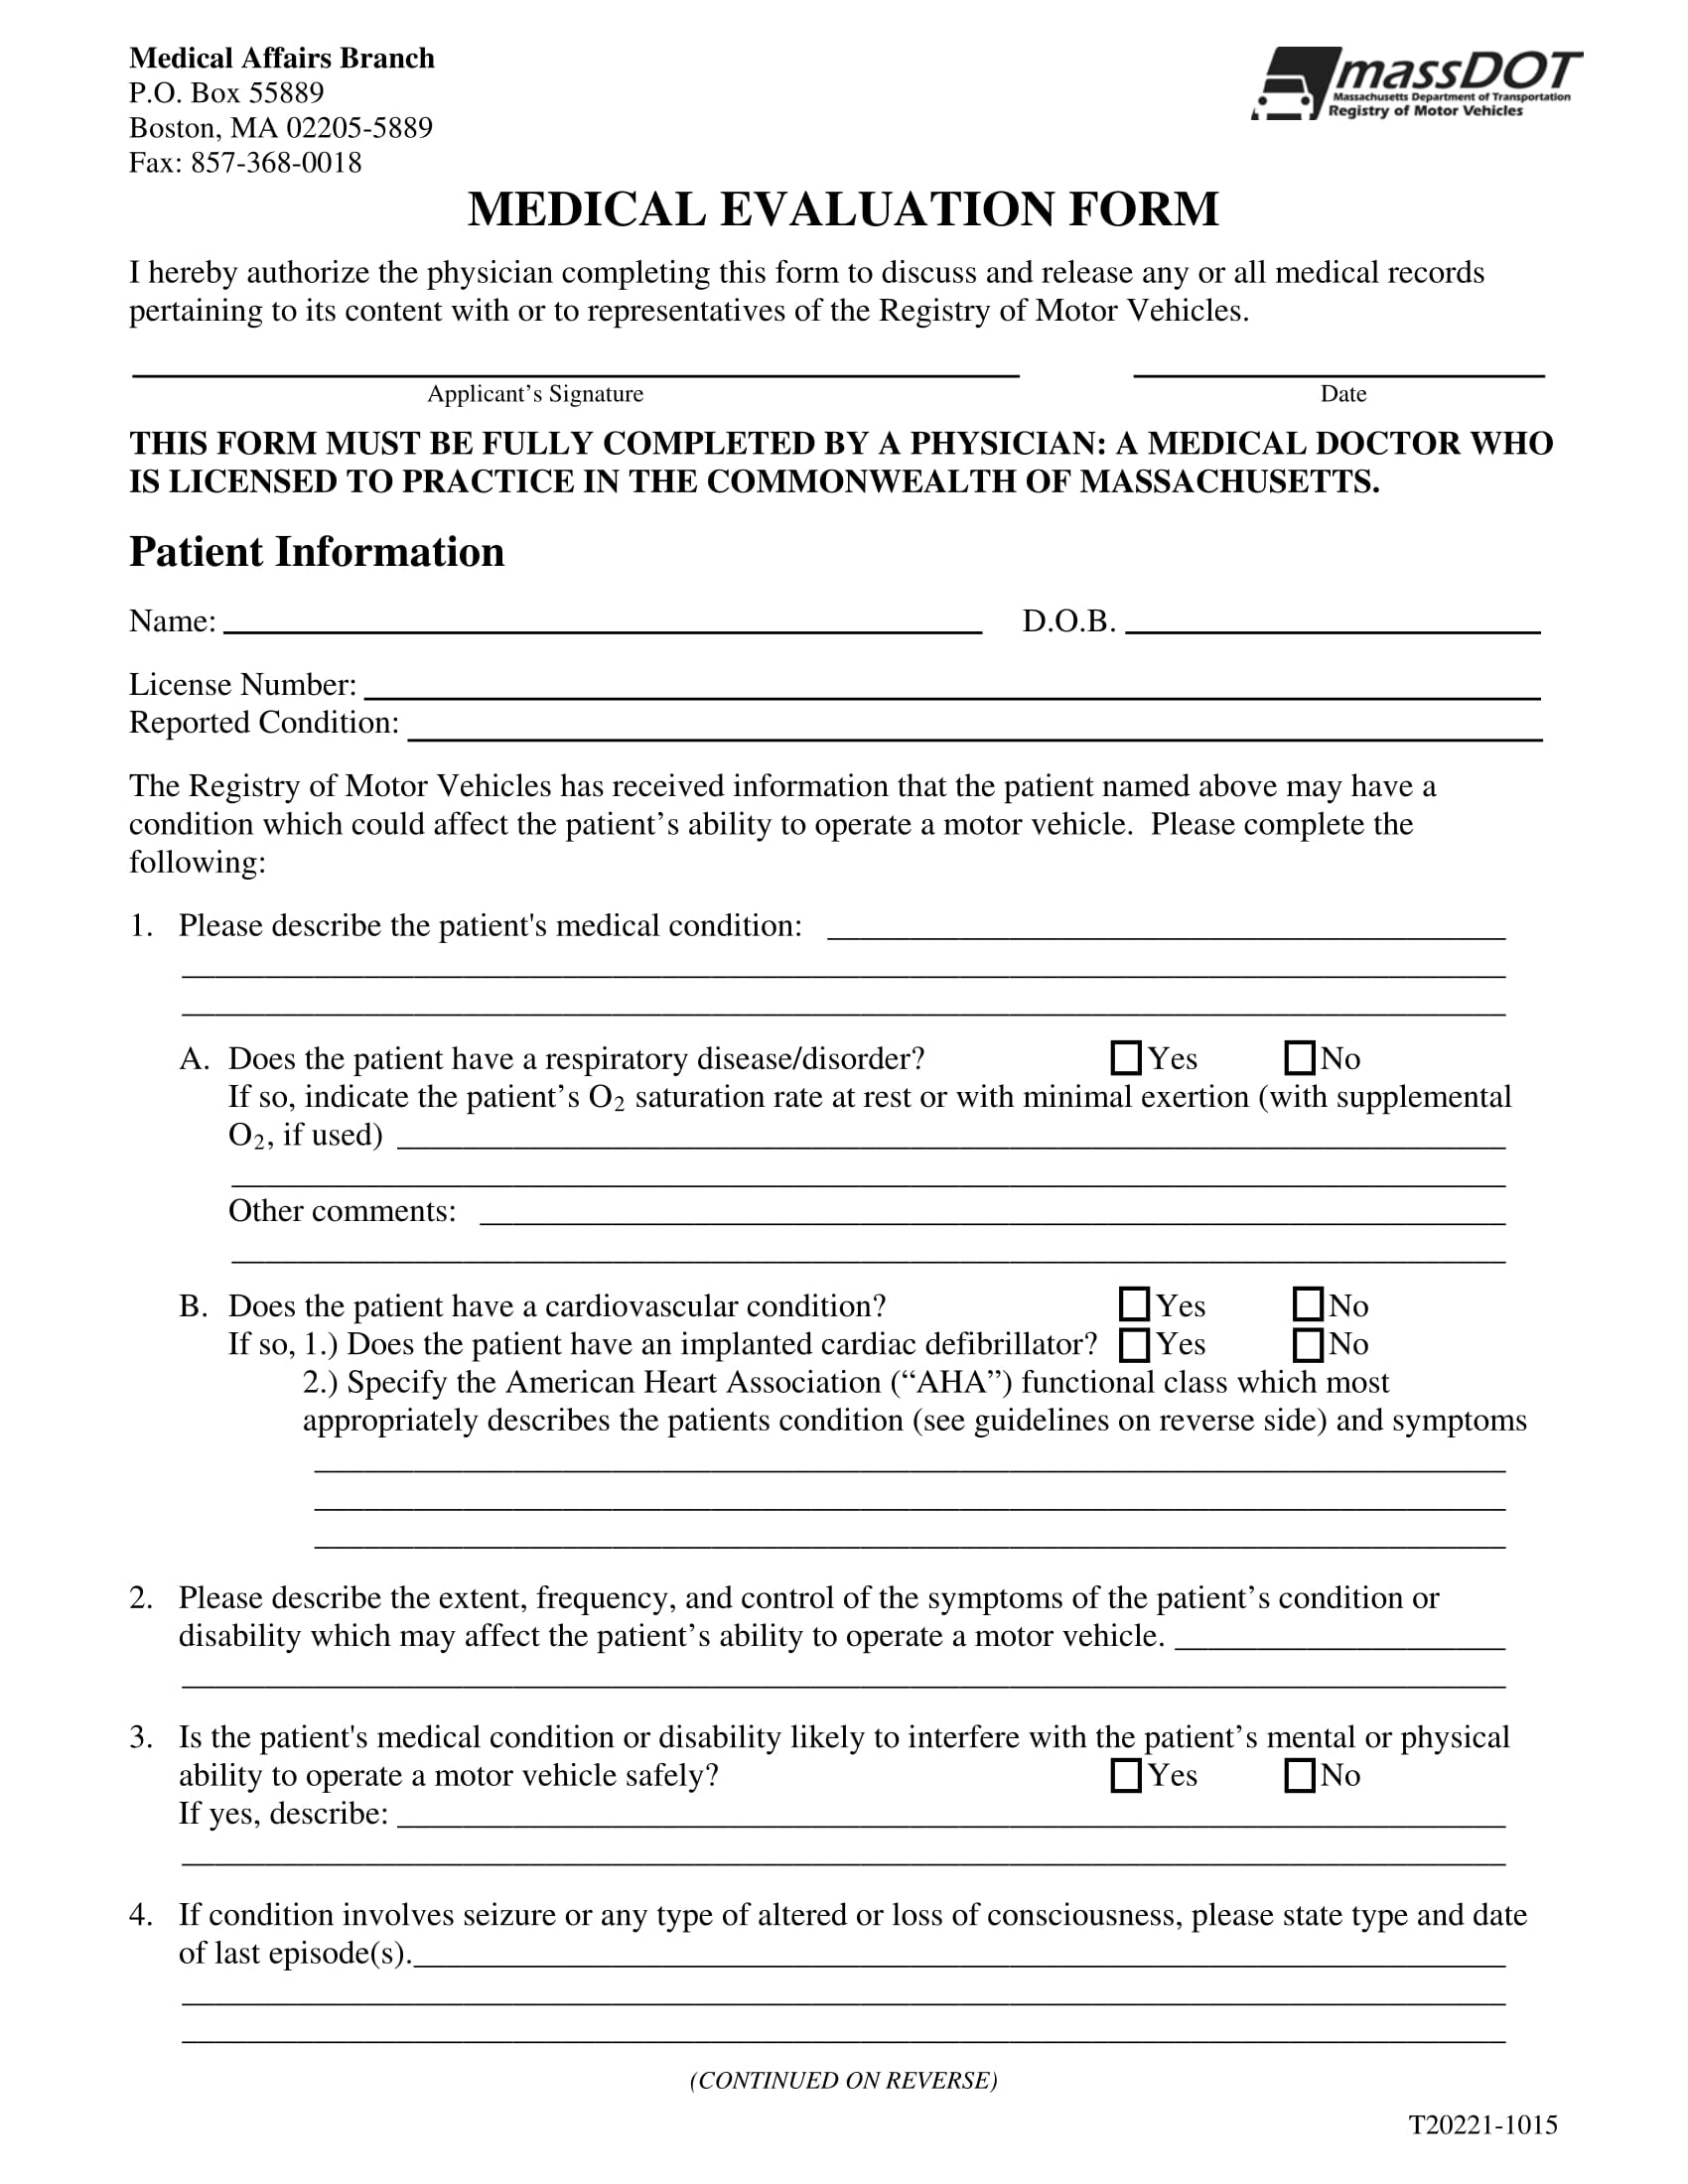 medical evaluation form example 1